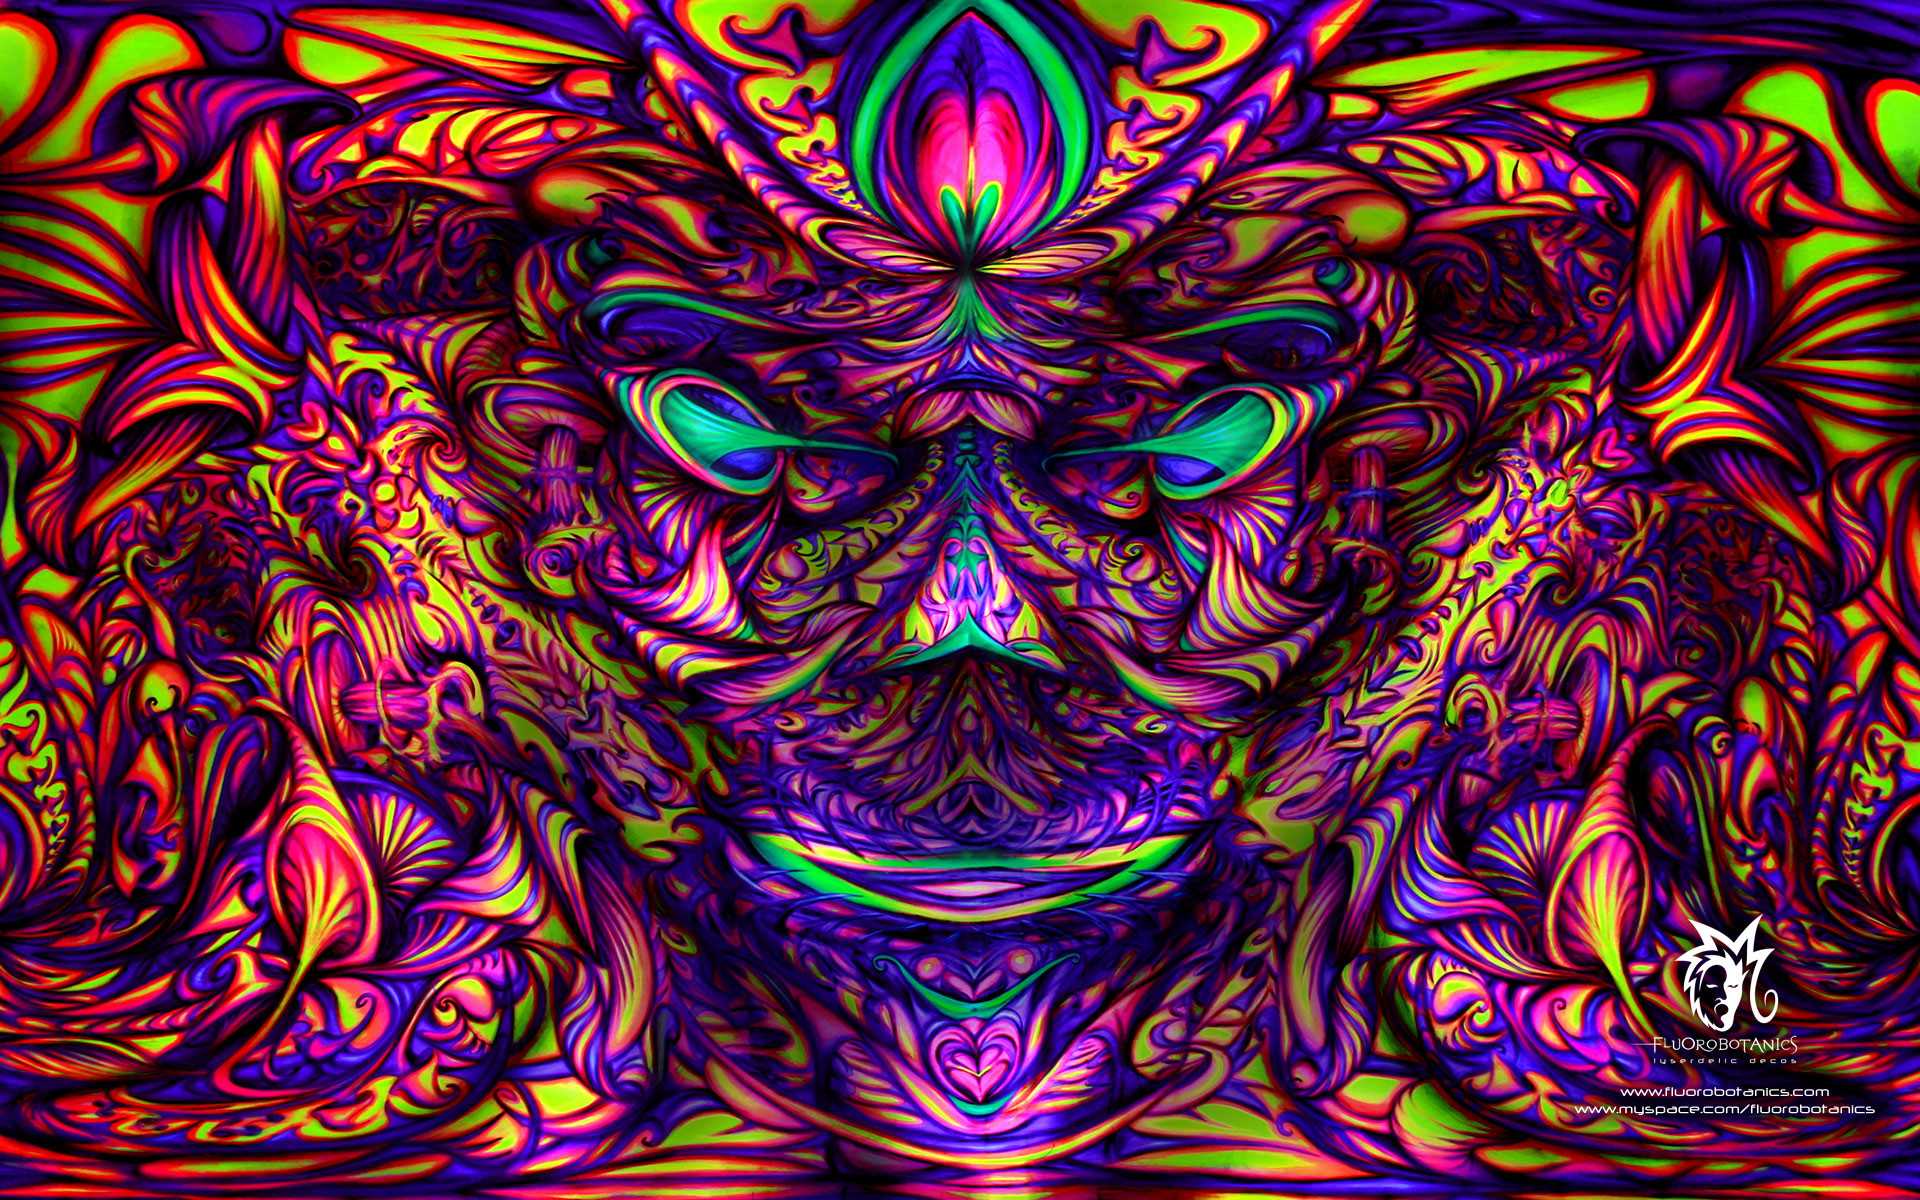 Trippy Acid Mobile Wallpapers Full Hd Pics For Computer Trip.